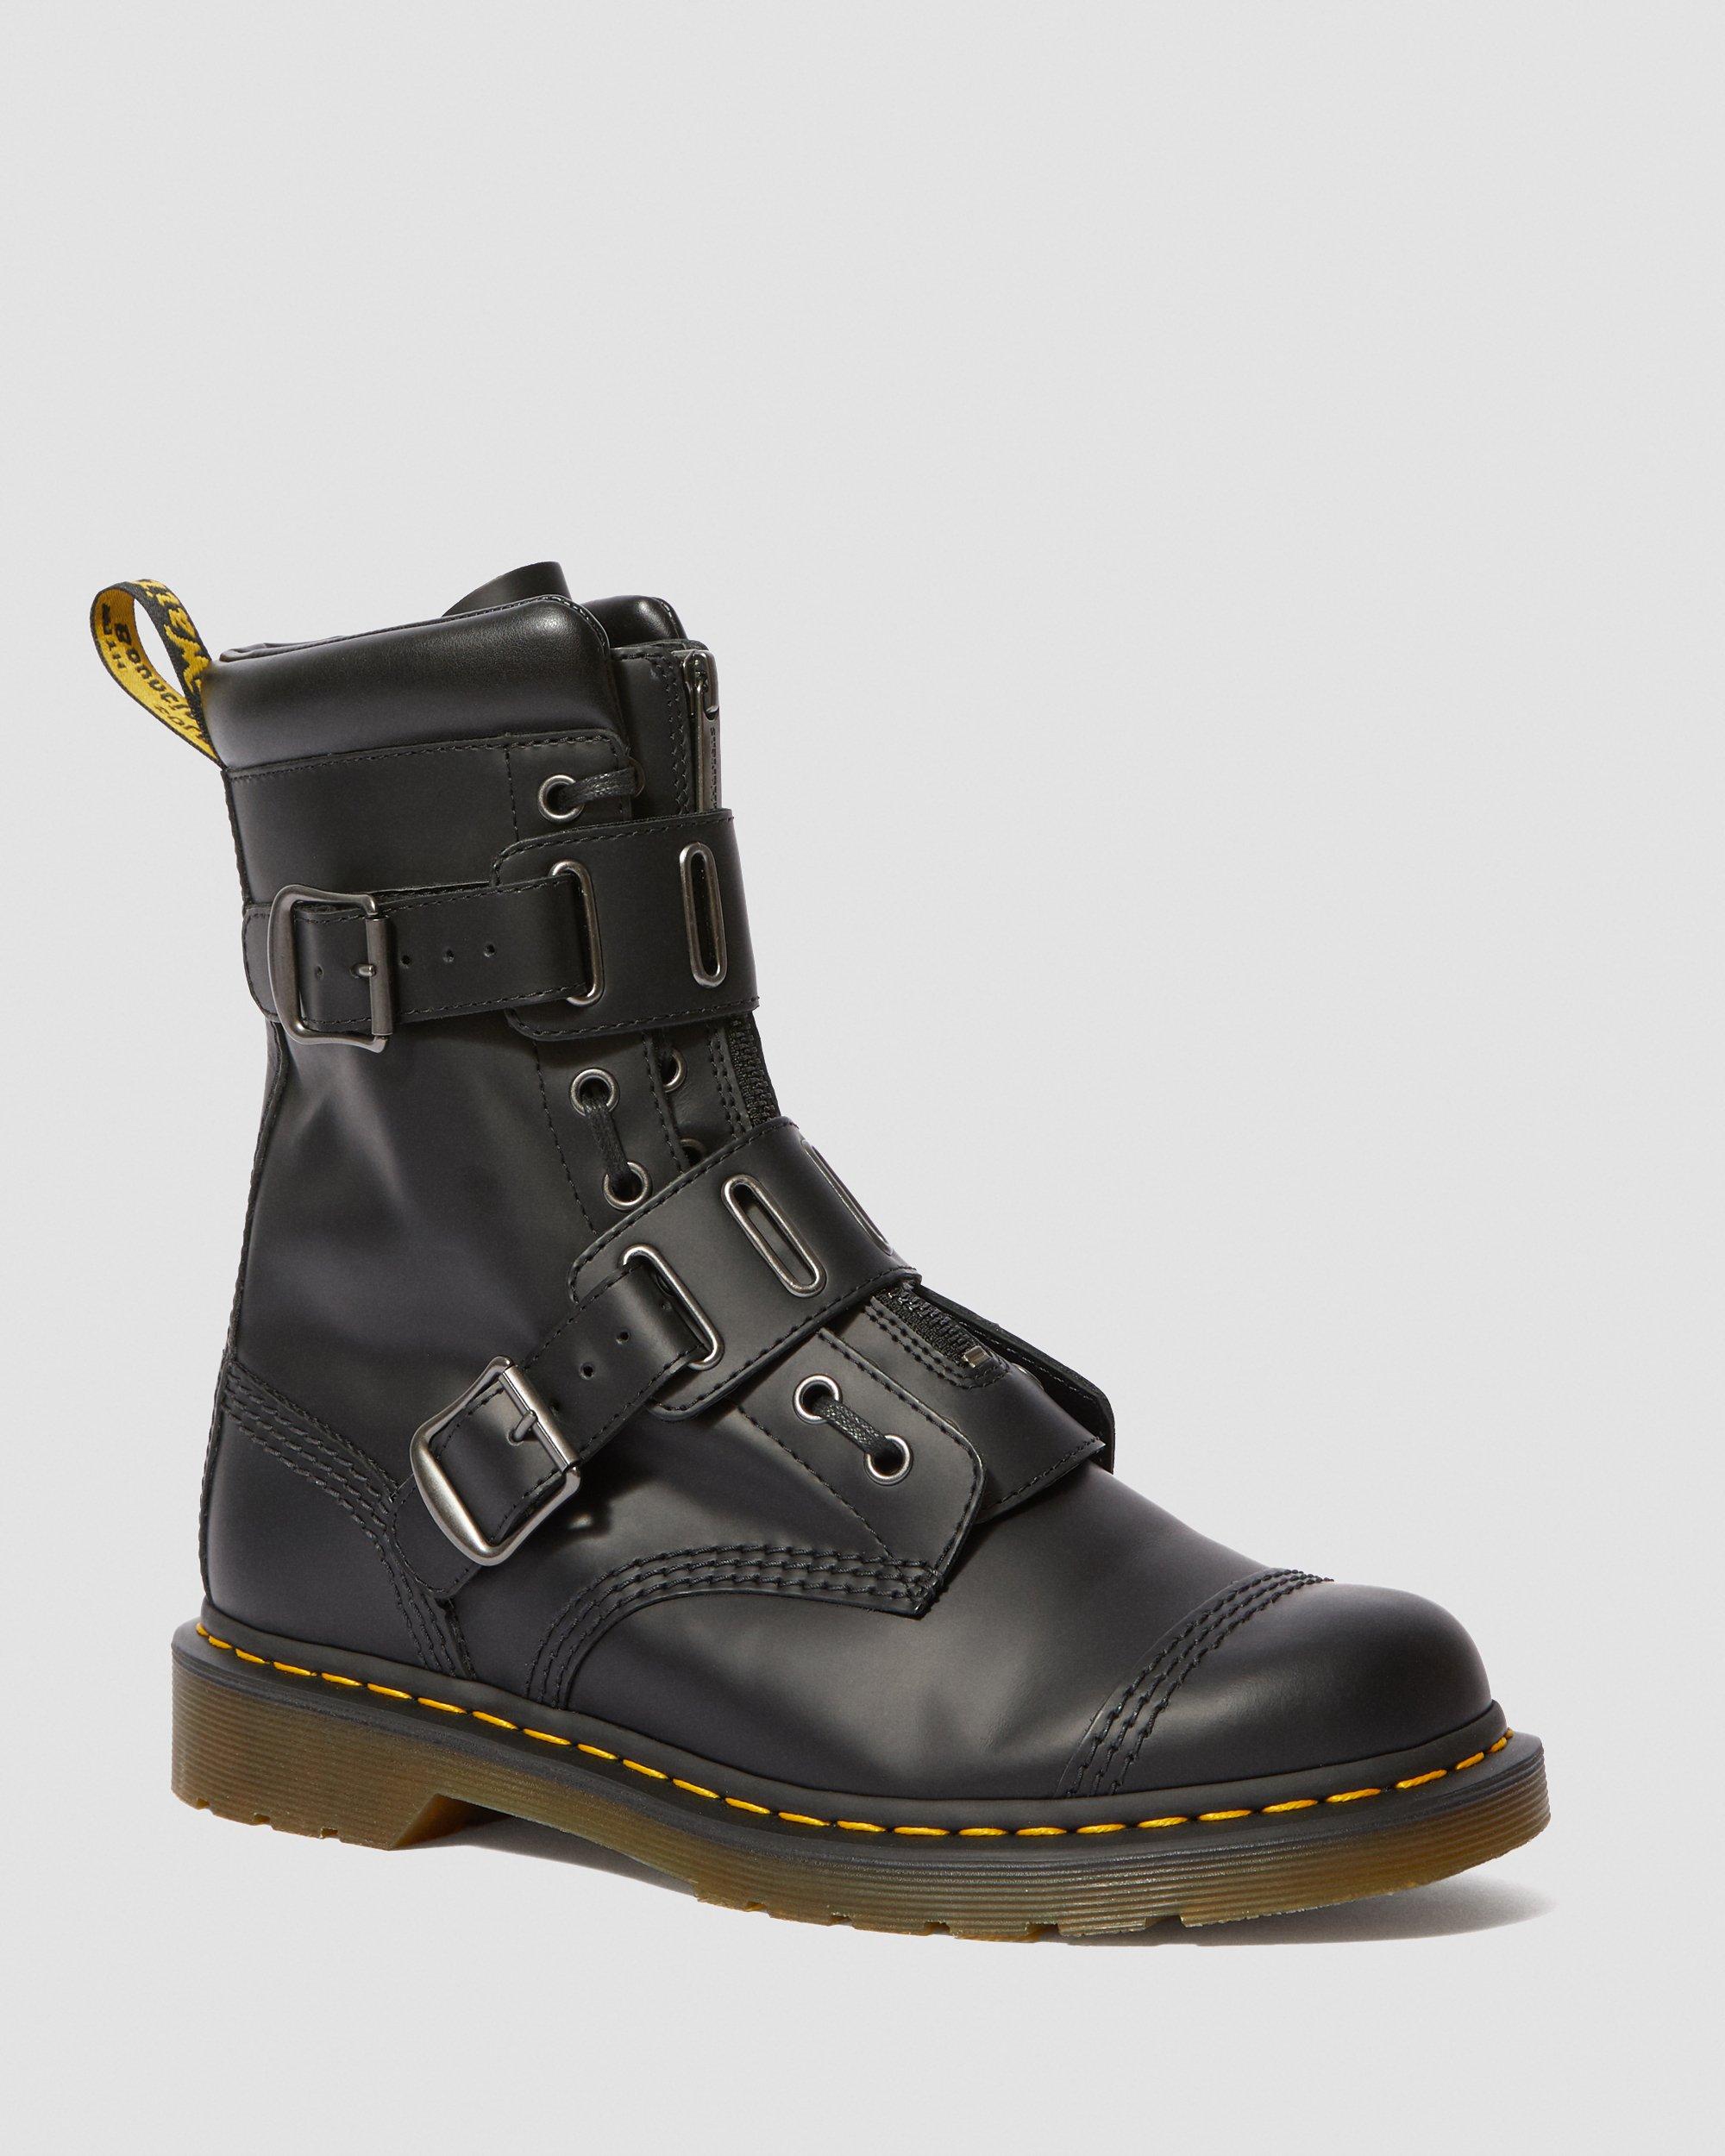 Quynn Leather Buckle Boots Dr. Martens